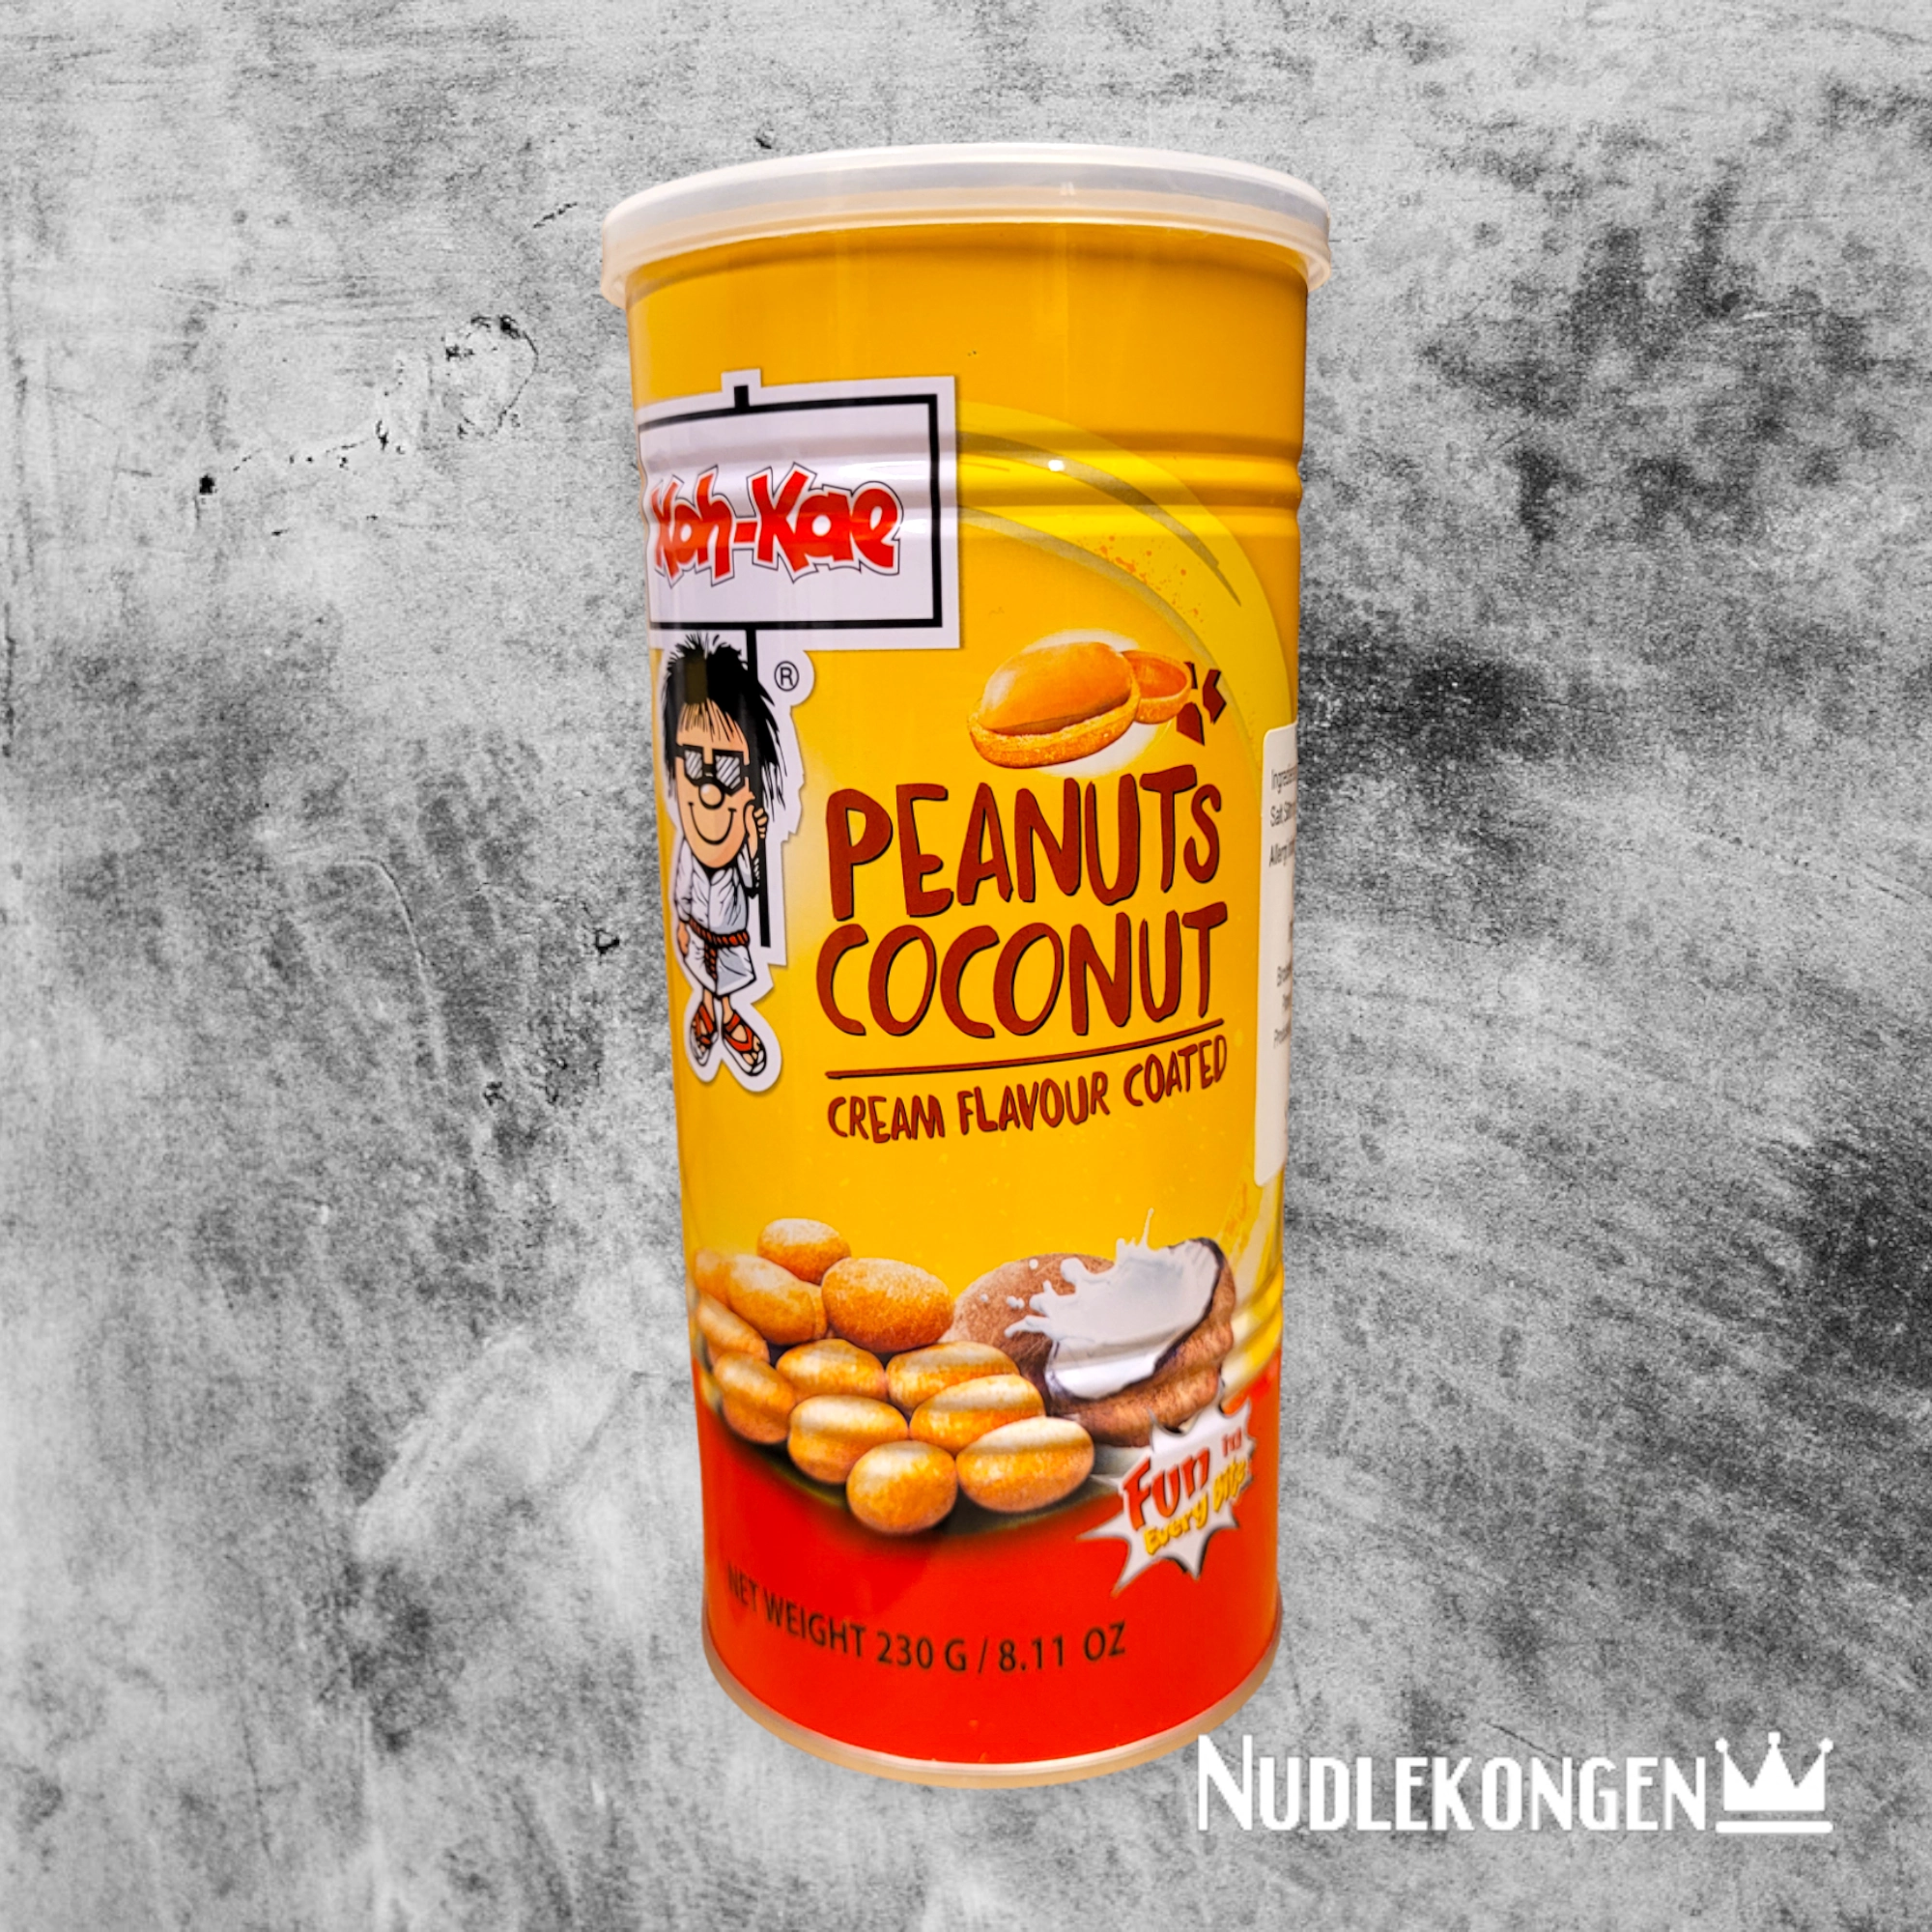 PEANUTS COCONUT CREAM FLAVOUR COATED - 230 gr